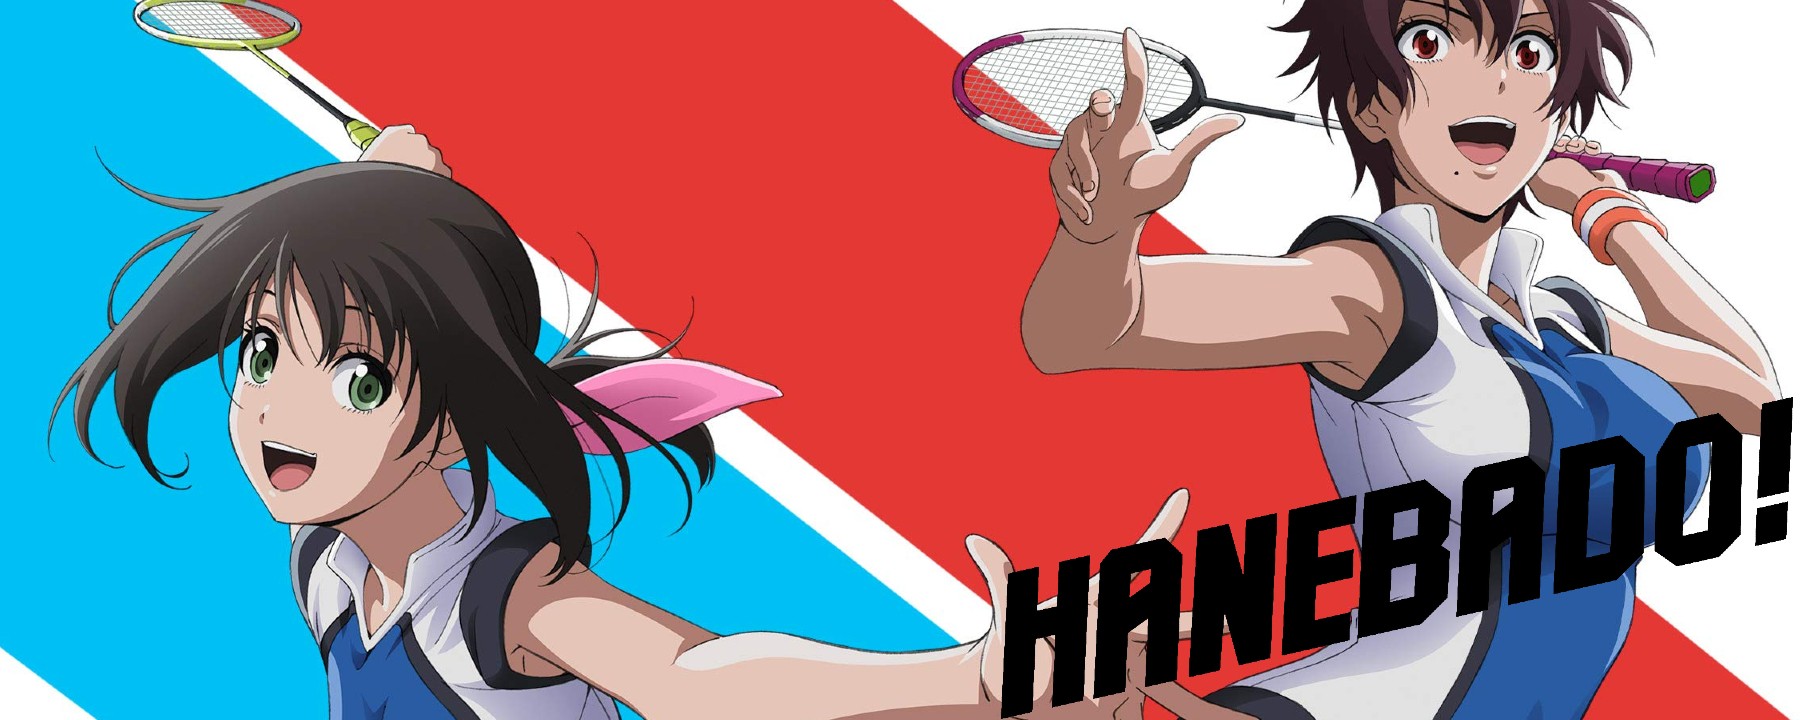 Fancy Words and Critical Analysis — Anime Reviews: Ping Pong the